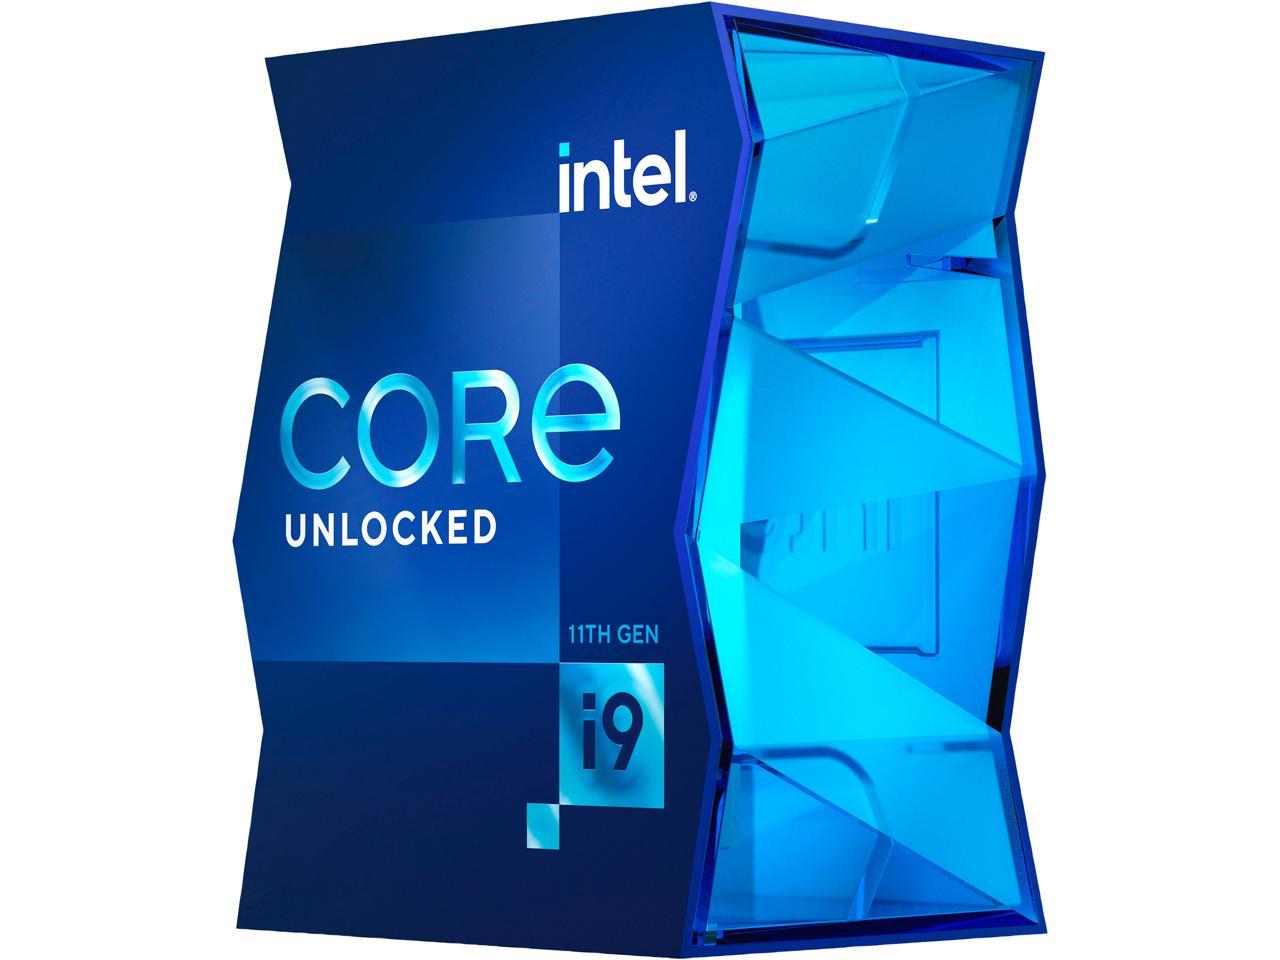 Intel i5 Processors Available at Overclockers UK